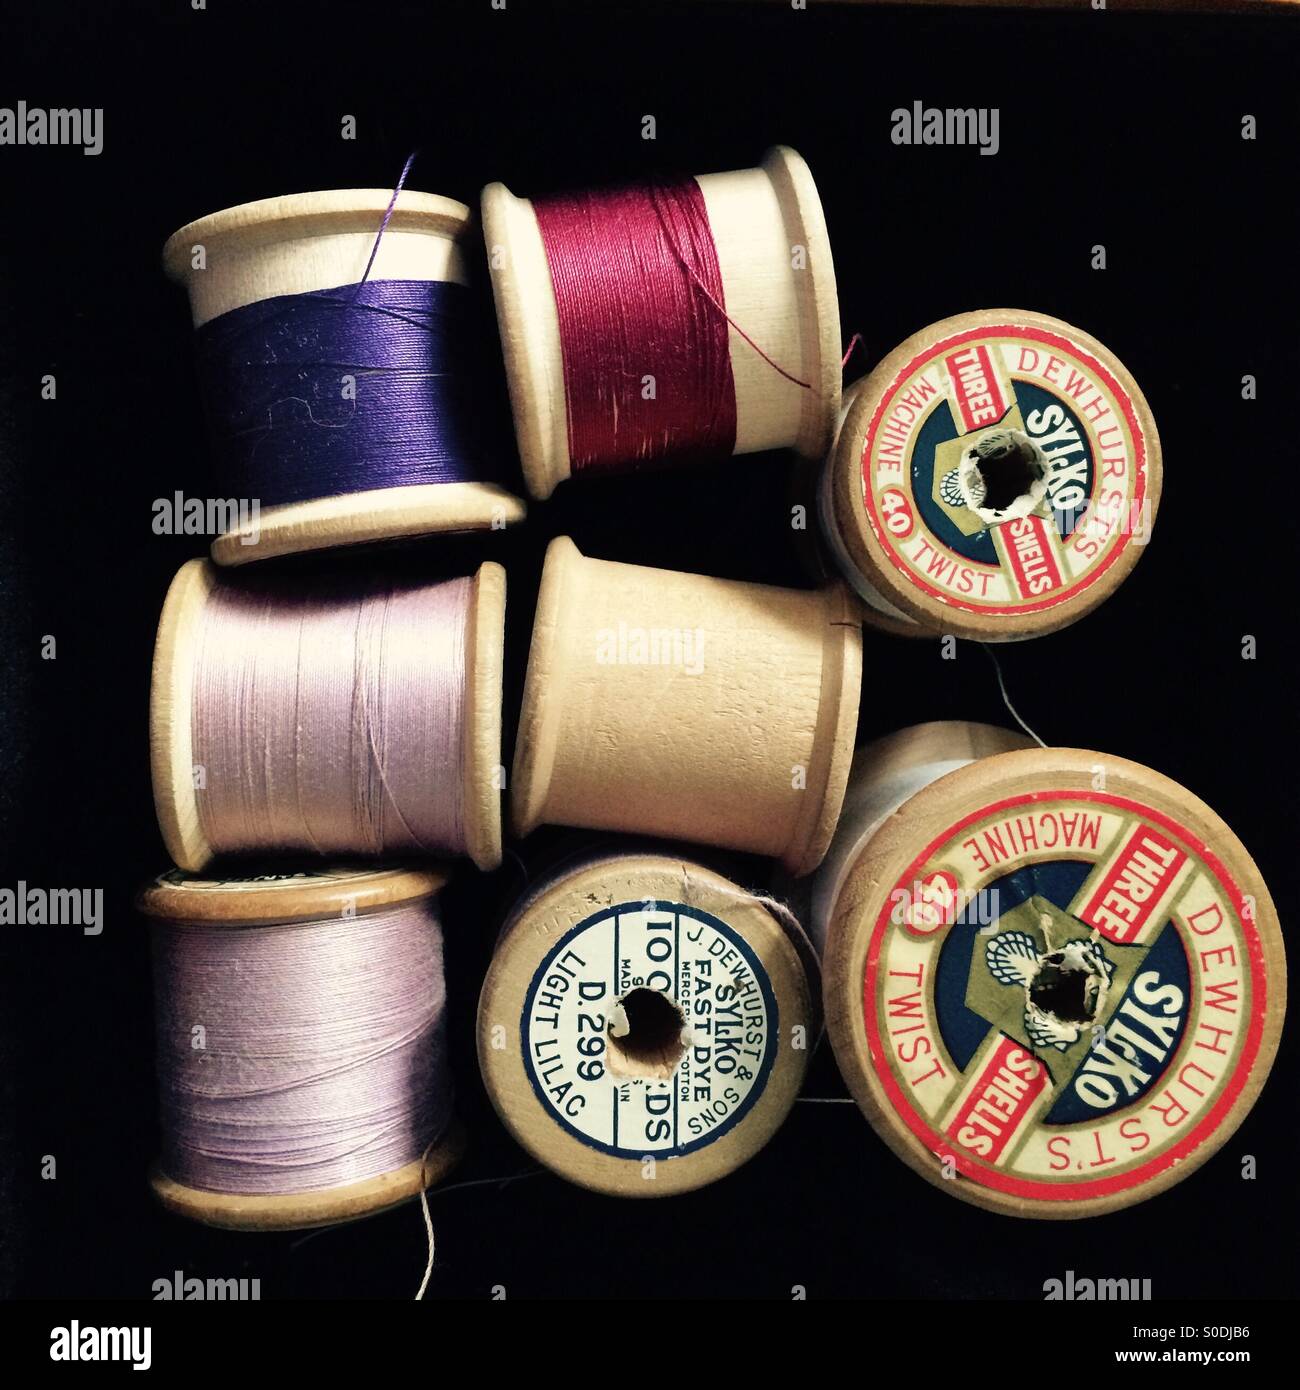 https://c8.alamy.com/comp/S0DJB6/old-wooden-cotton-reels-with-coloured-thread-S0DJB6.jpg